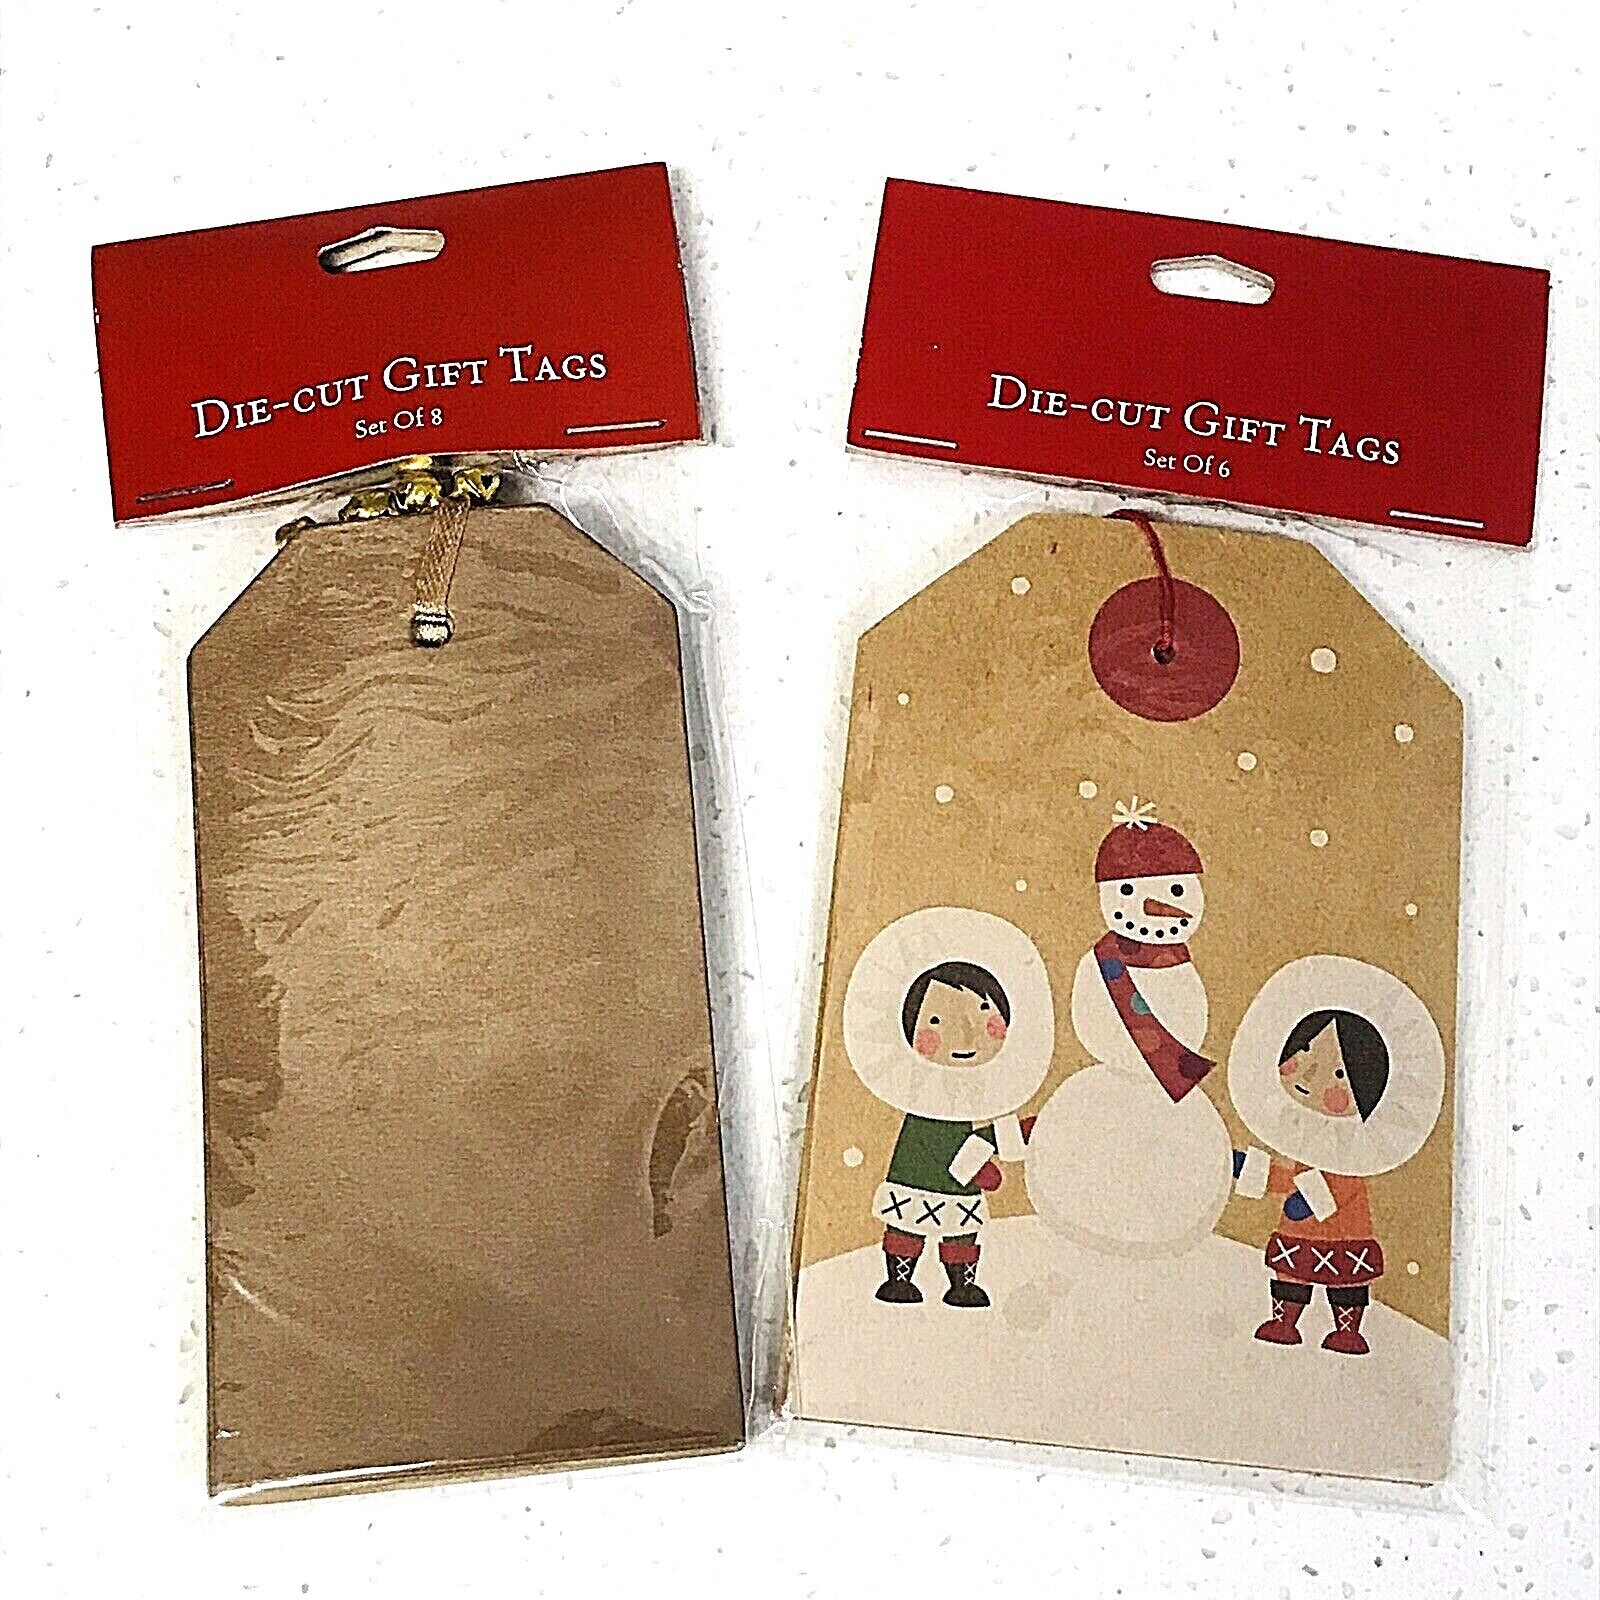 2x World Market Die-cut Christmas Holiday Gift Tags = 14 Total